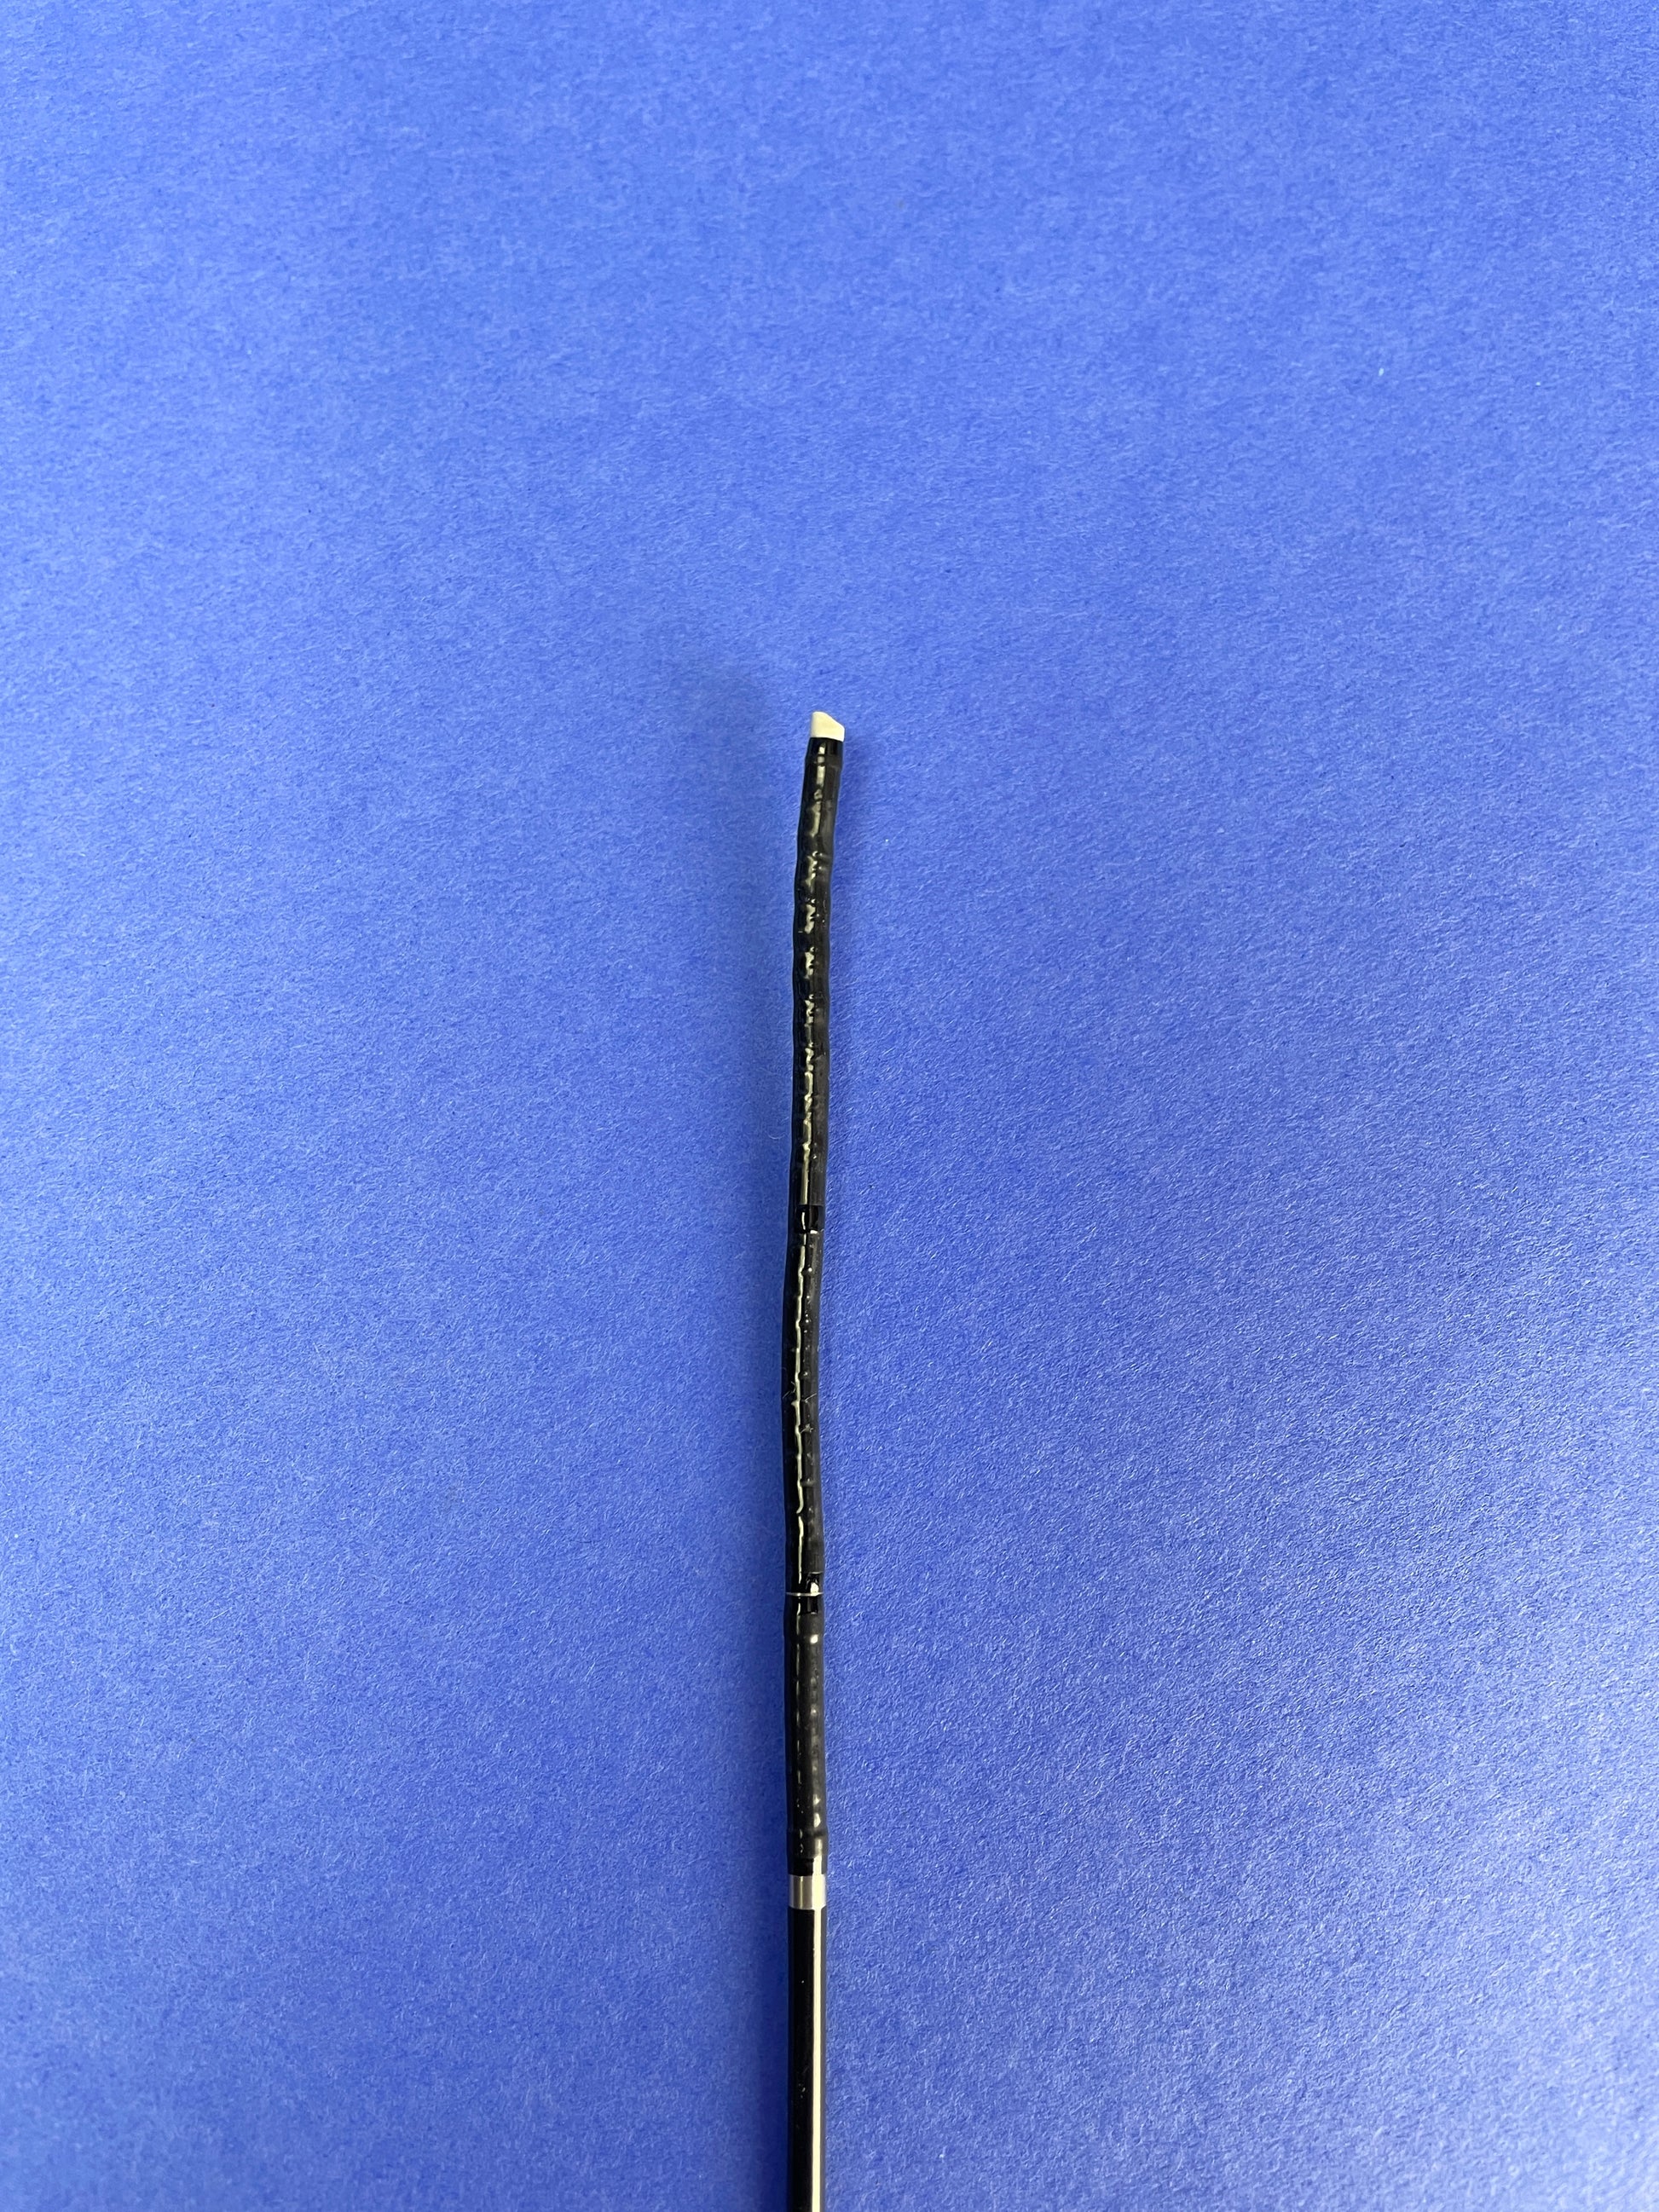 Innovative tip design eases insertion,  Distal End Outer Diameter, Medical Endoscope with working Channel 